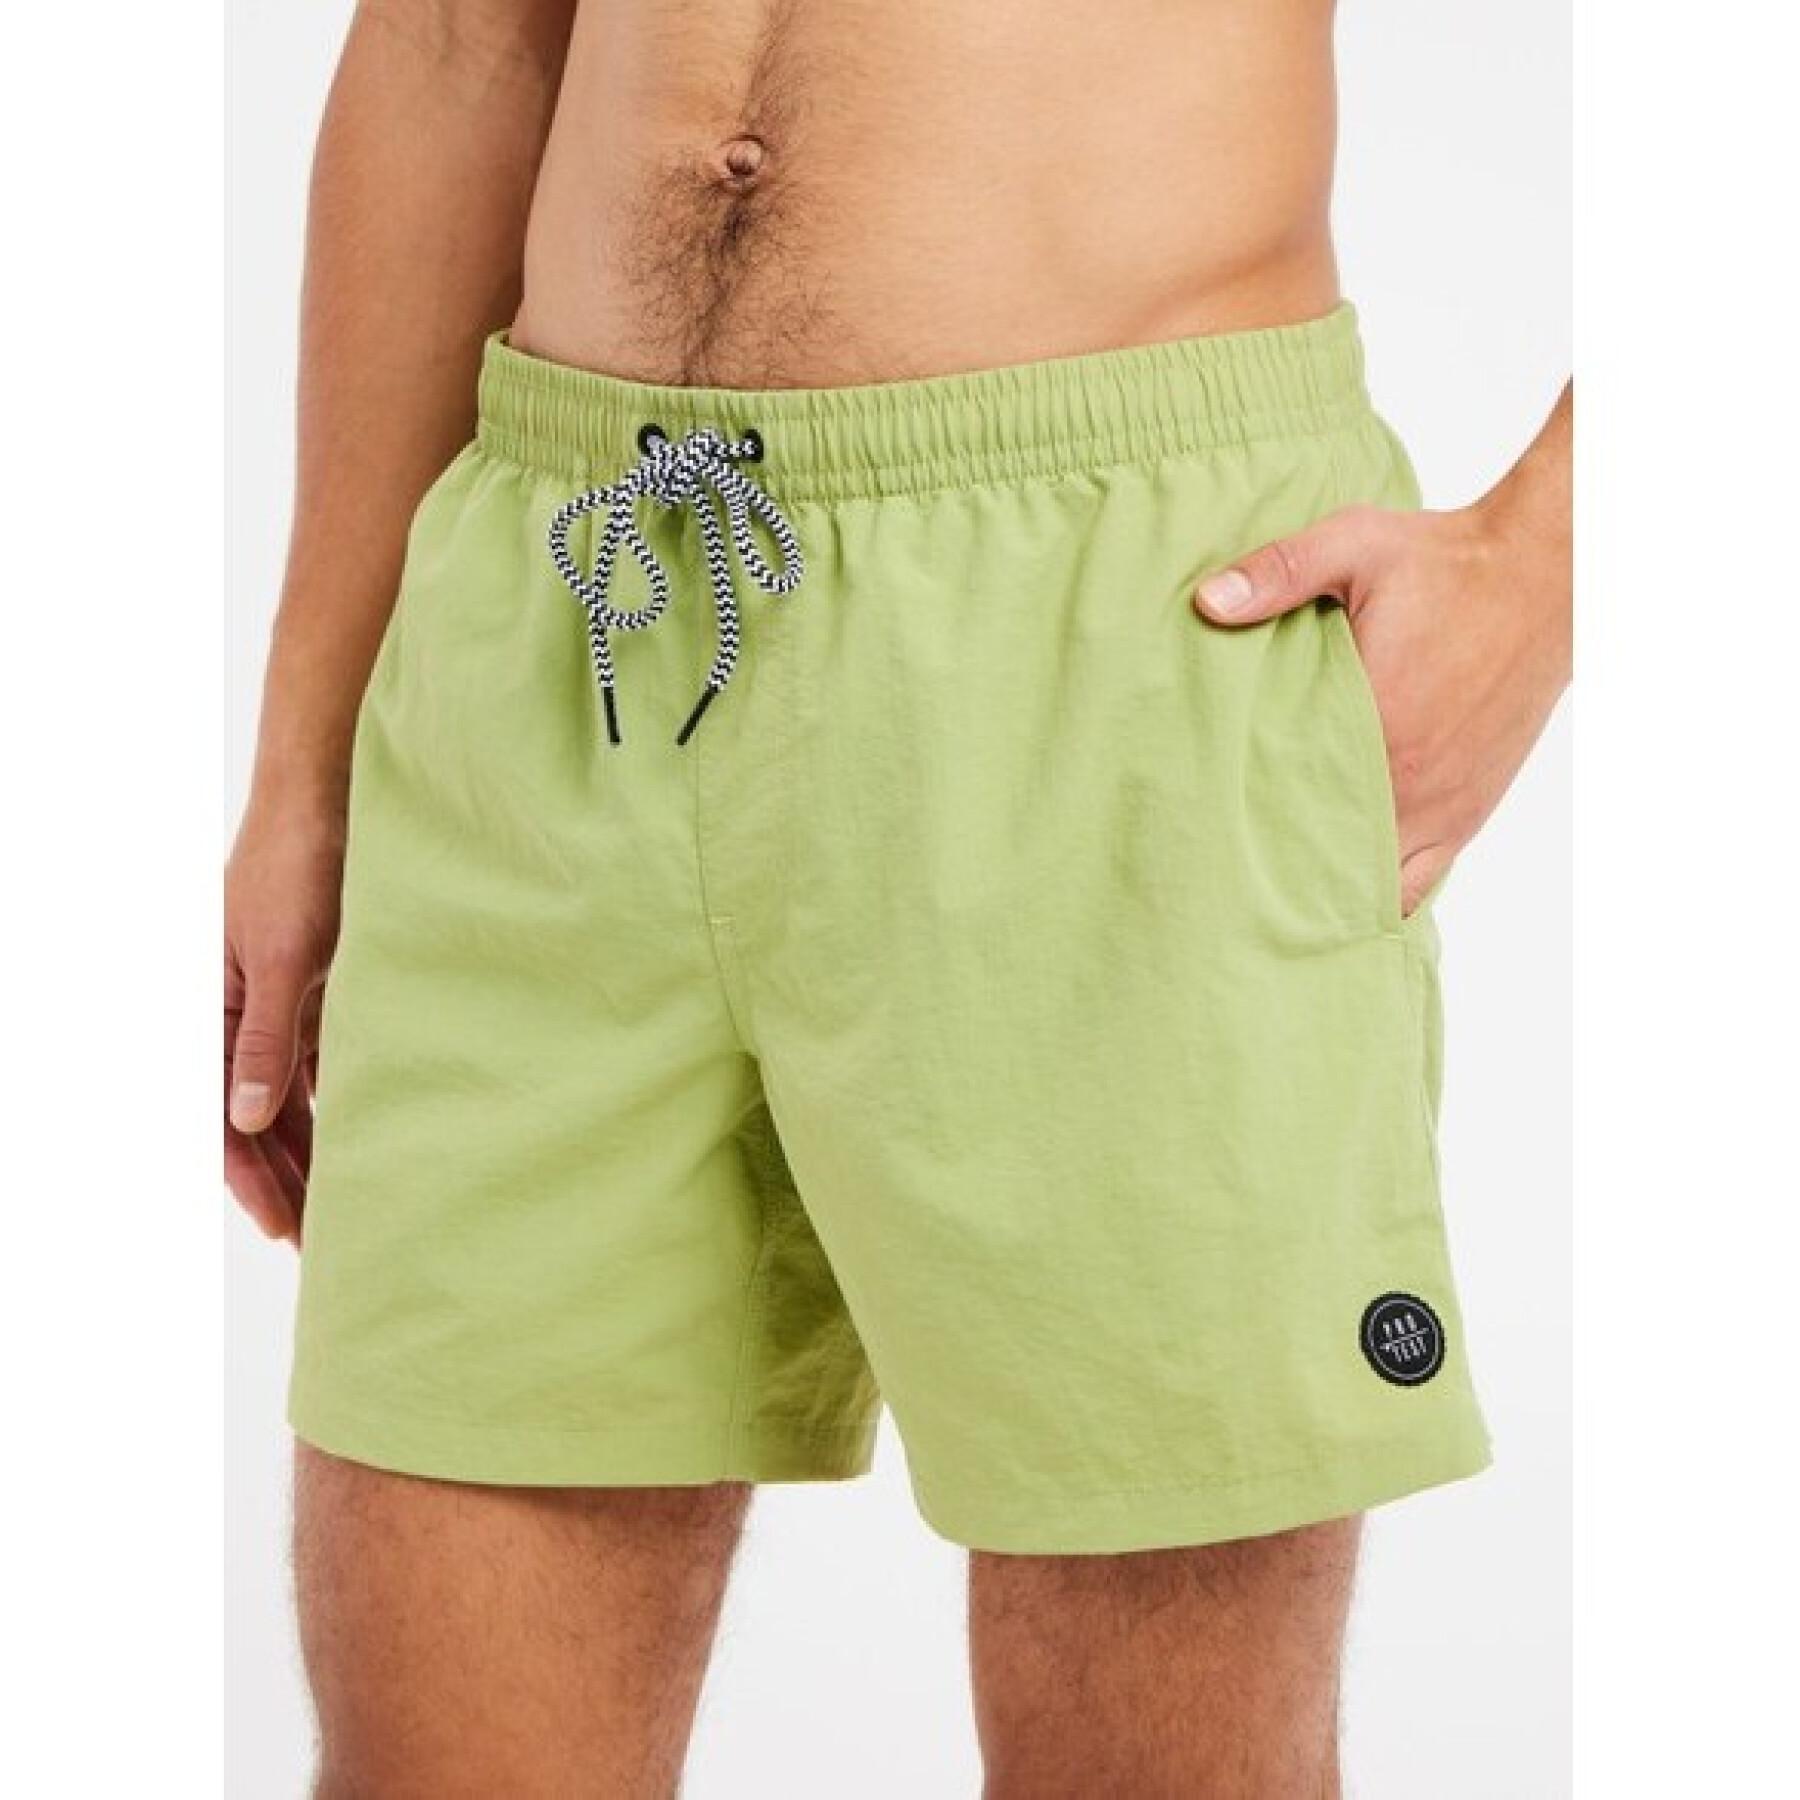 Strand shorts Protest Faster